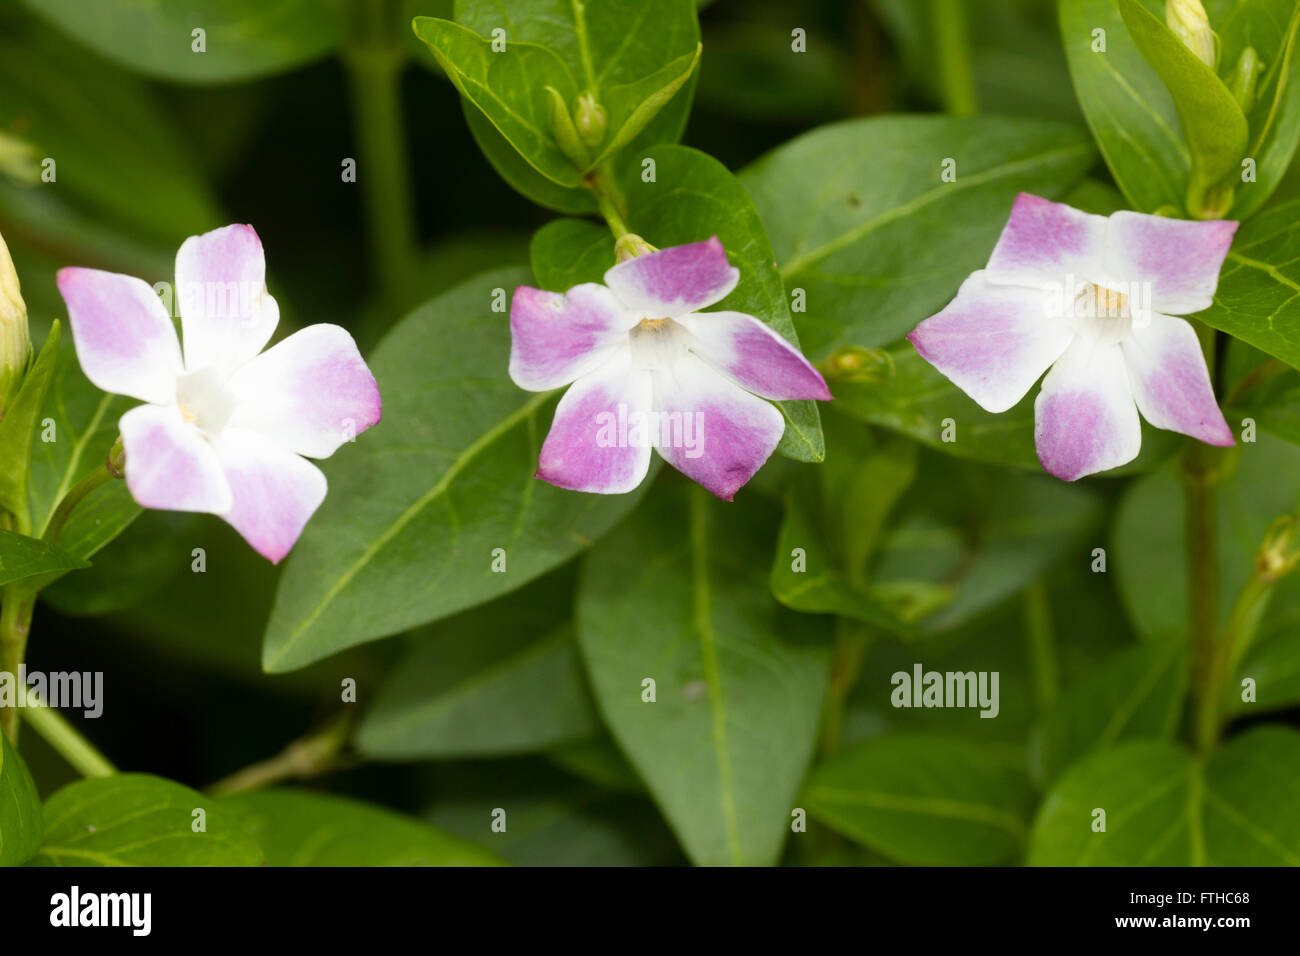 Winter flowers of the long blooming evergreen periwinkle, Vinca difformis 'Jenny Pym' Stock Photo